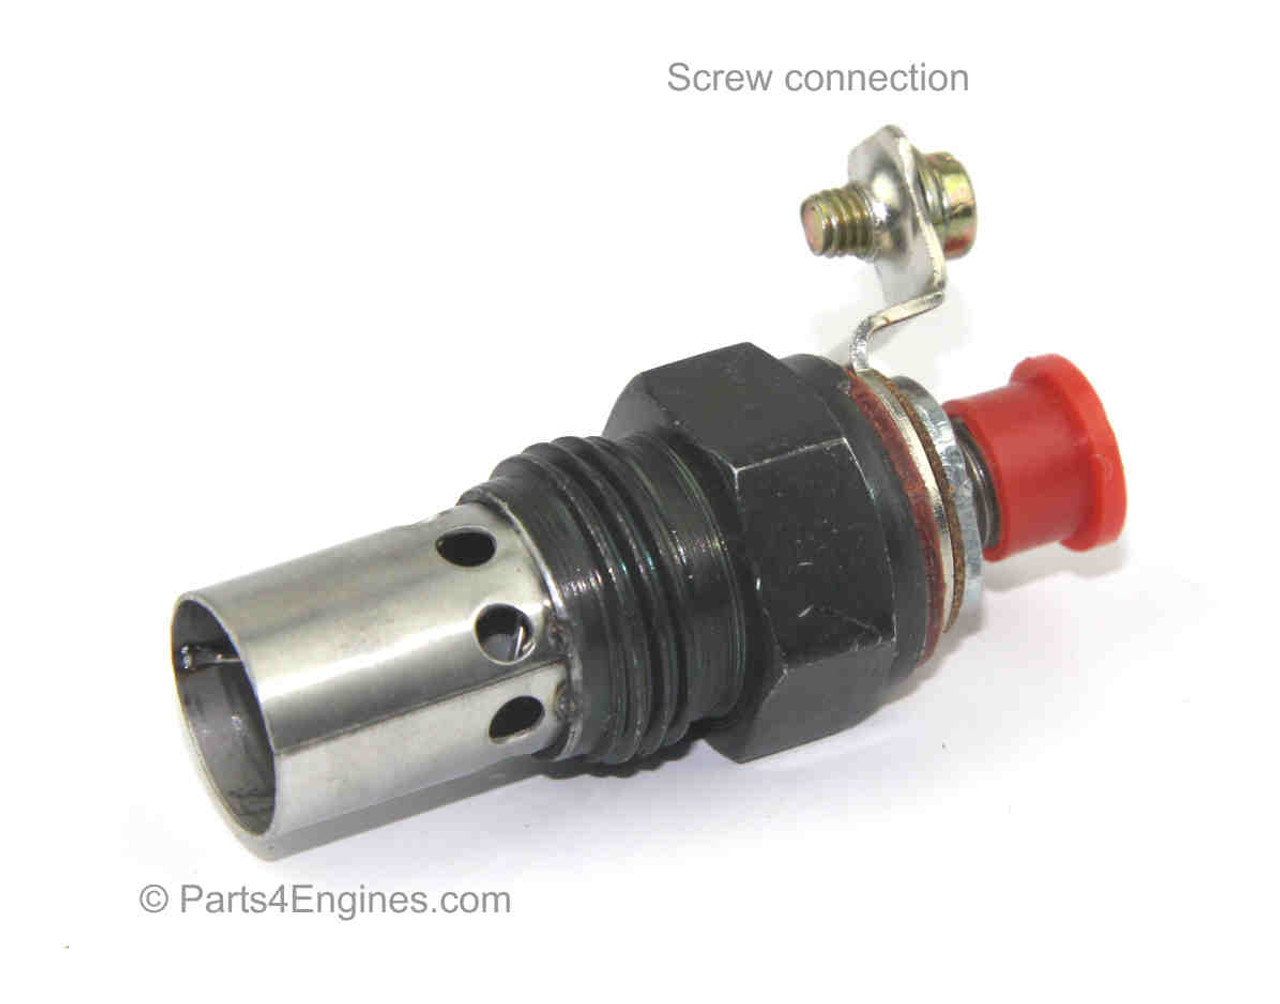 Screw connection: Perkins M92 Glowplug Thermostart from Parts4engines.com